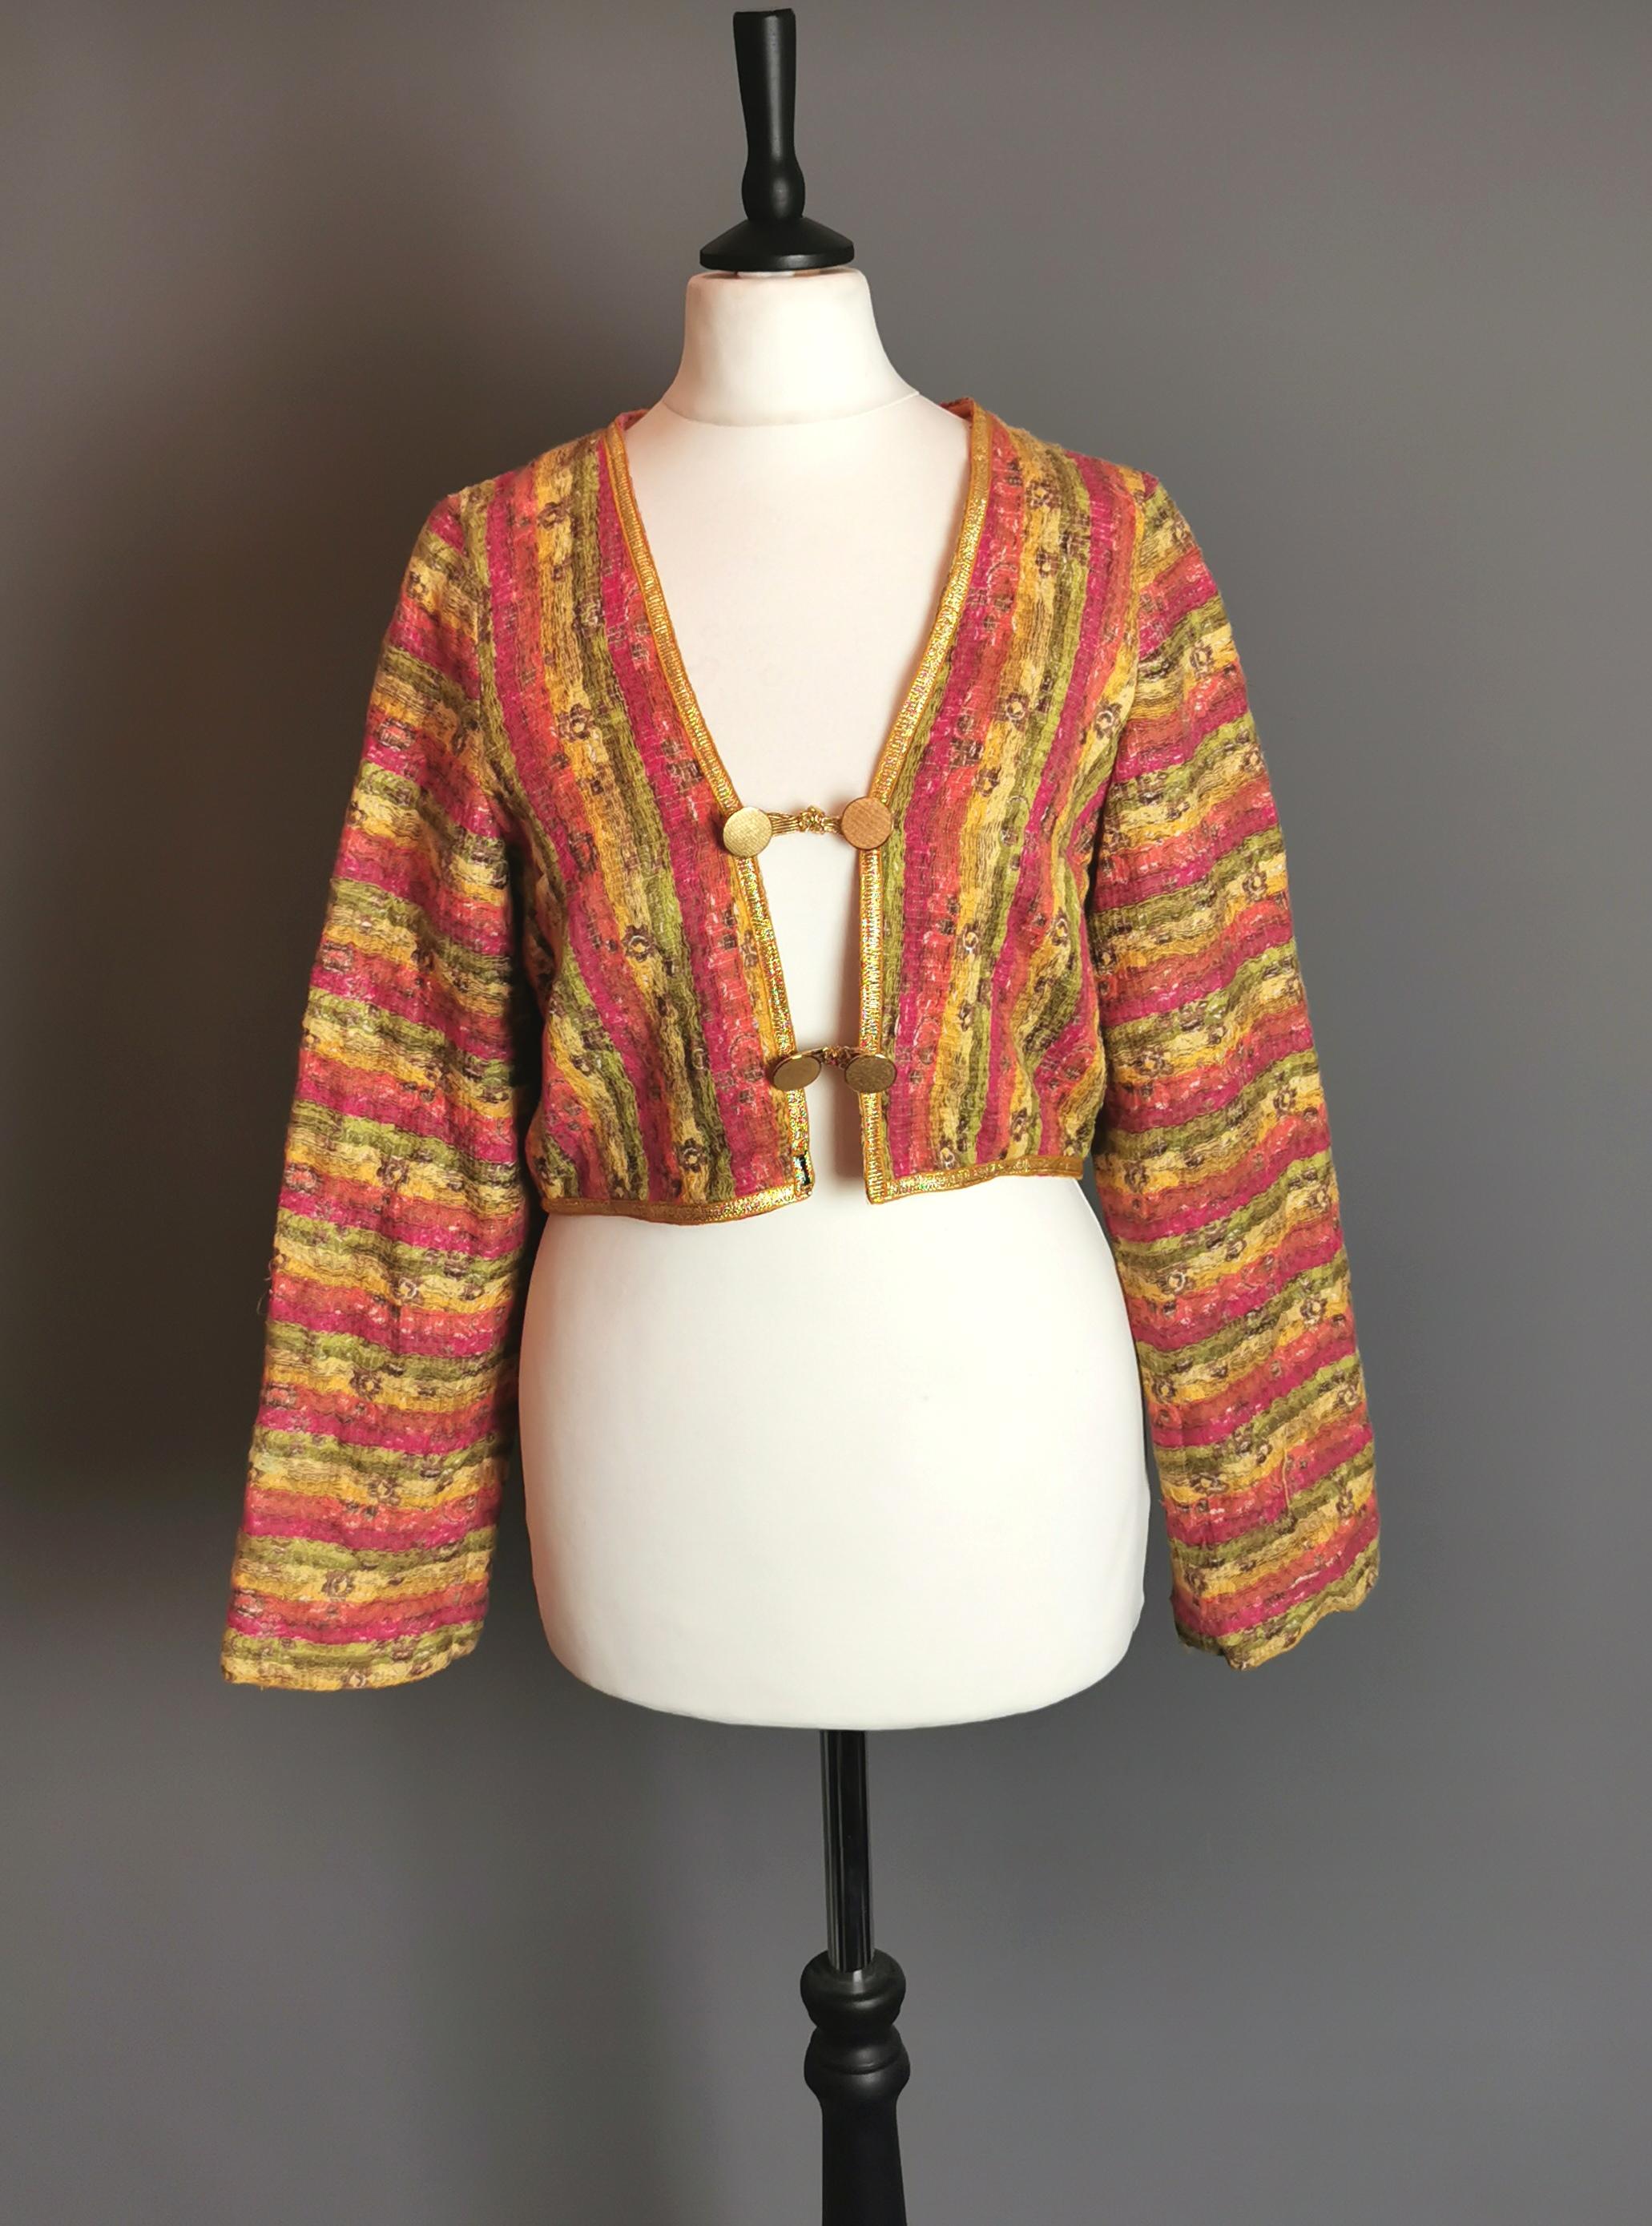 A unique vintage c1970s vibrant cropped jacket.

This is a truly wonderful piece with a bright colourful woven cotton and wool body with a floral print and gold tone metallic thread highlights.

It has gold tone buttons and a gold coloured sateen